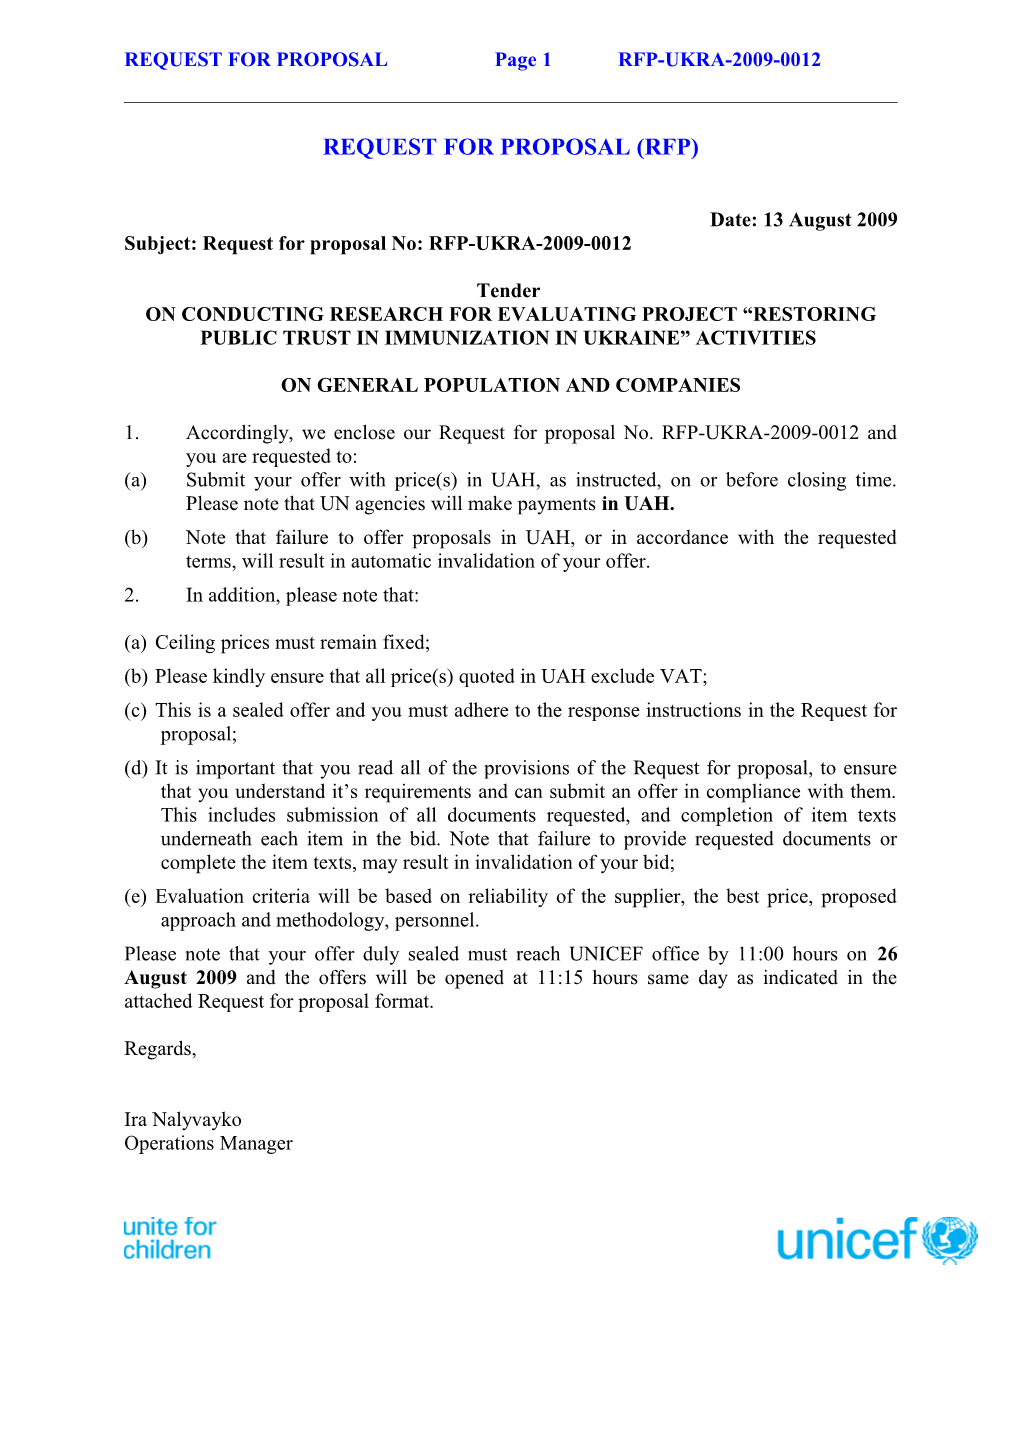 REQUEST for Proposalpage 1 RFP-UKRA-2009-0012